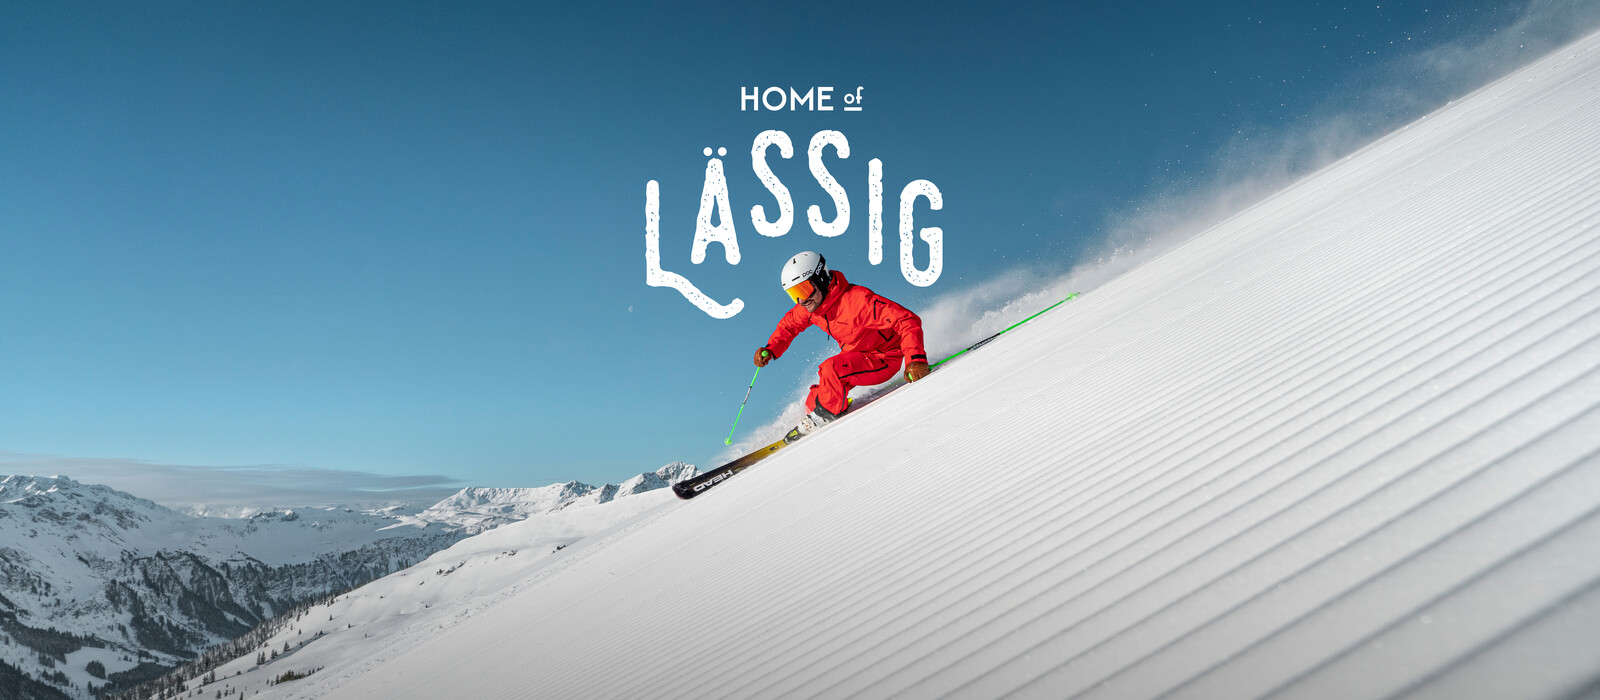 Skiing in Saalbach - Welcome to the Home of Lässig! | © Christoph Johann